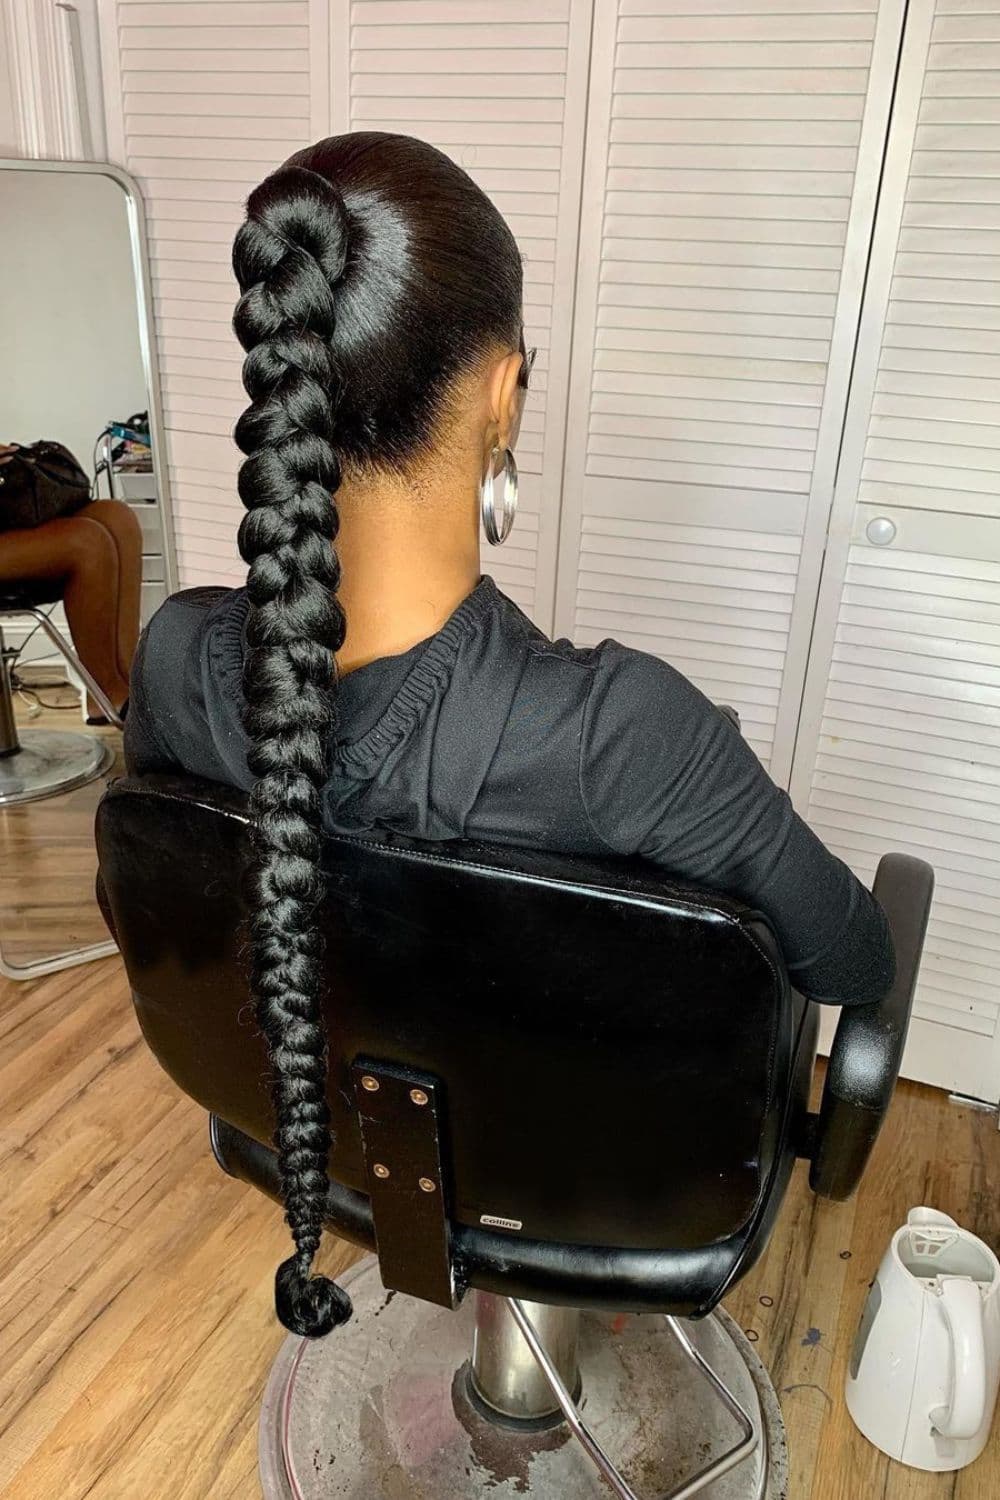 A woman sitting on a swivel chair with a black braided ponytail.